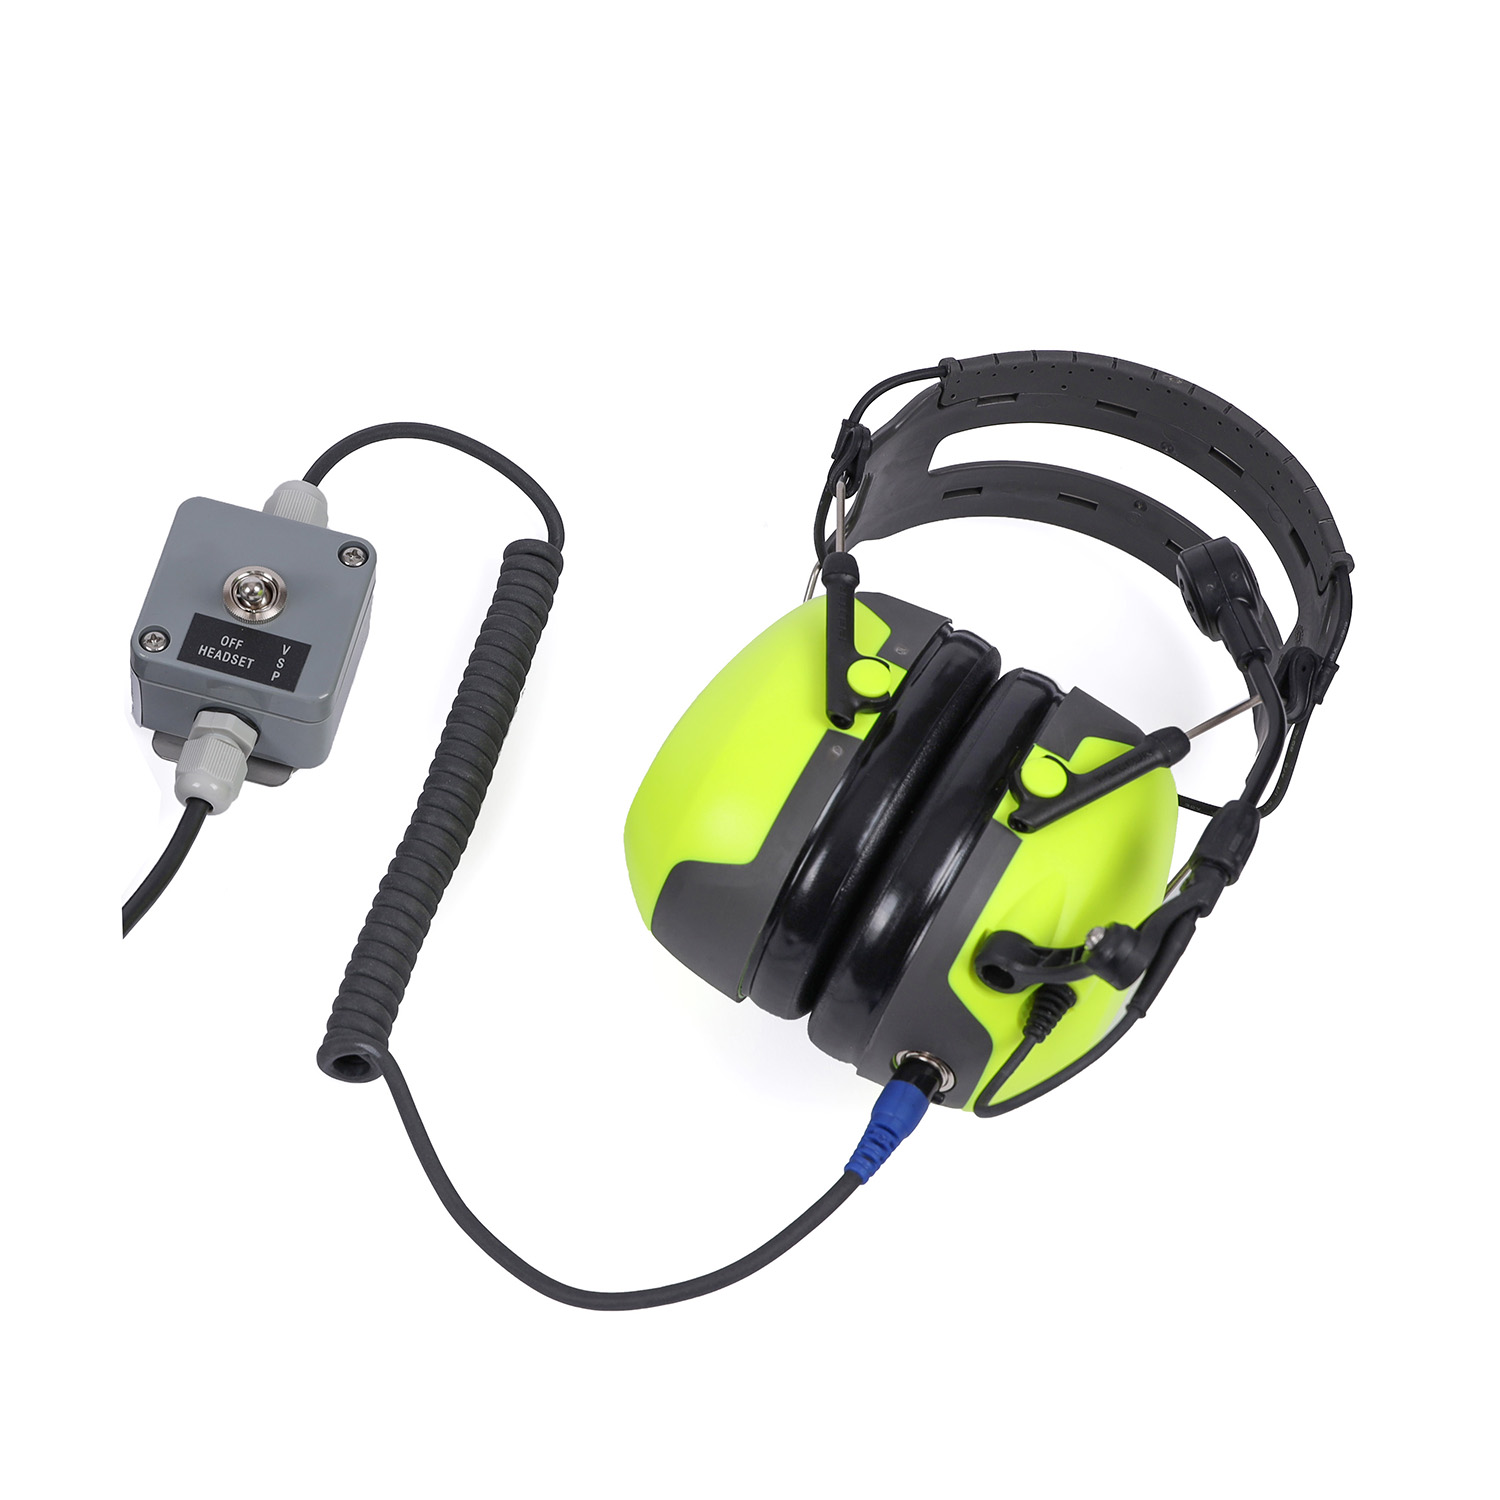 1020600787 VMP36PELAd  Fixed mount headset with 10m cable and NC microphone
replacement for VMP36PEL